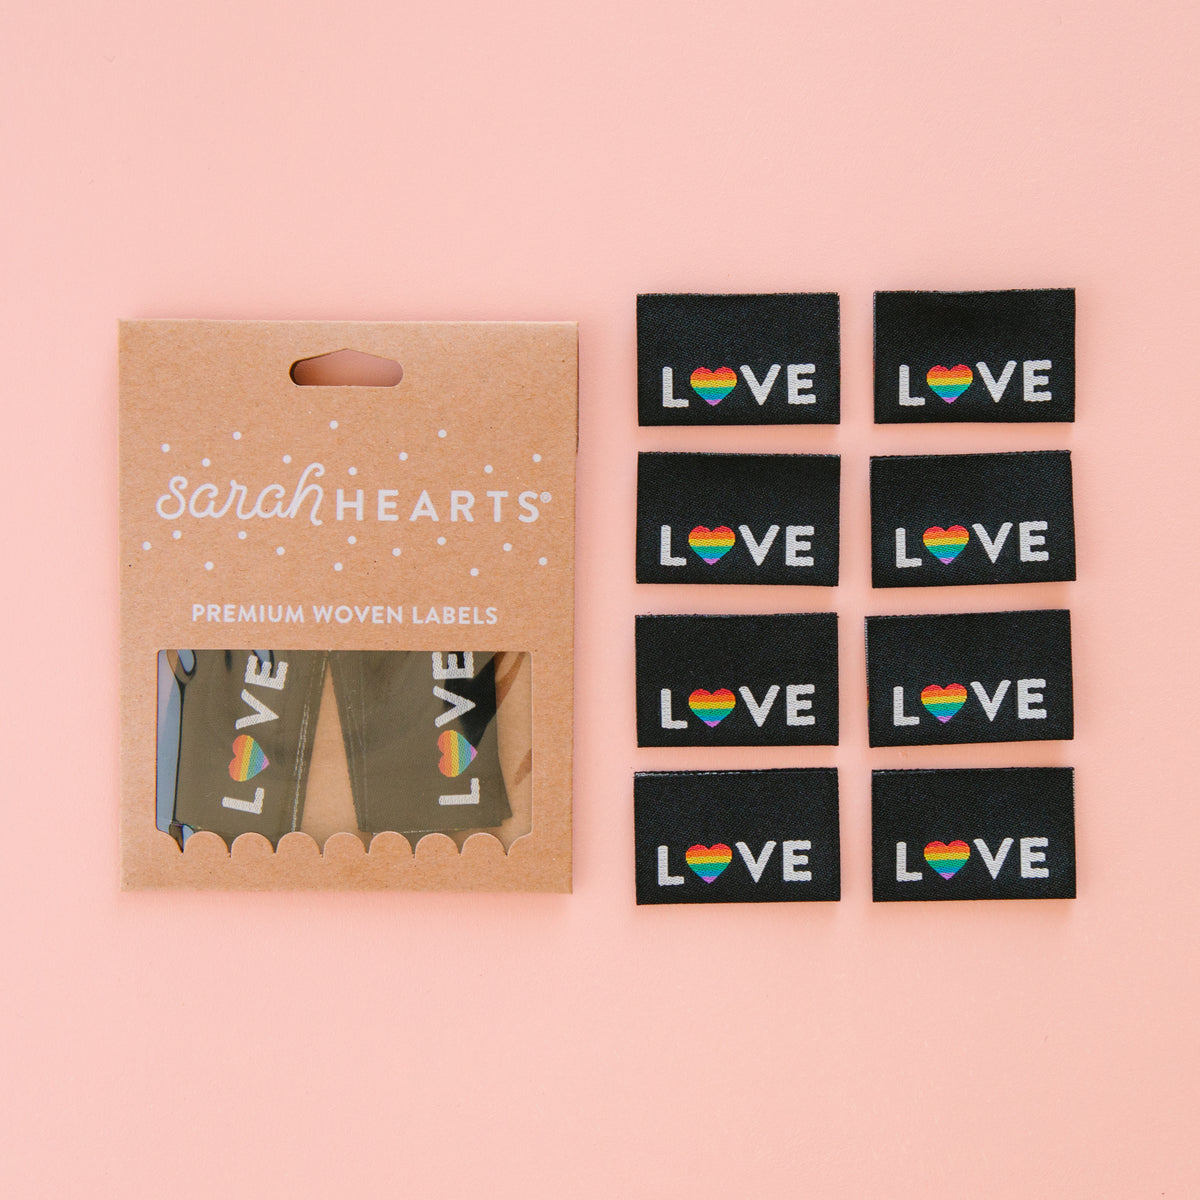 Love Pride Heart Woven Sewing Labels by Sarah Hearts